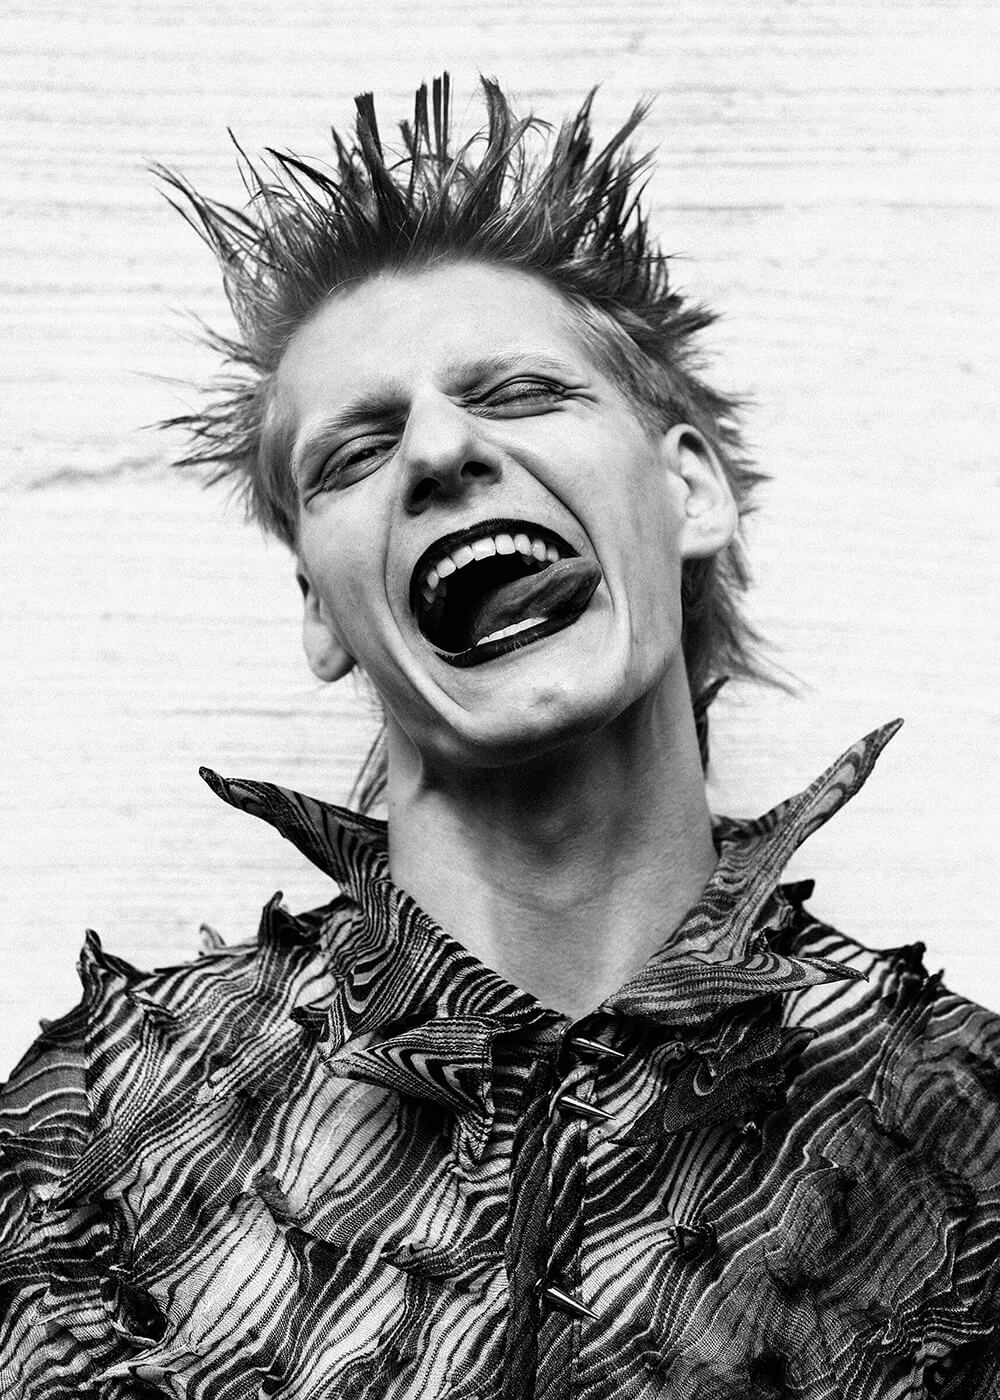 A black and white portrait of a young punk man making a crazy facial expression to the camera